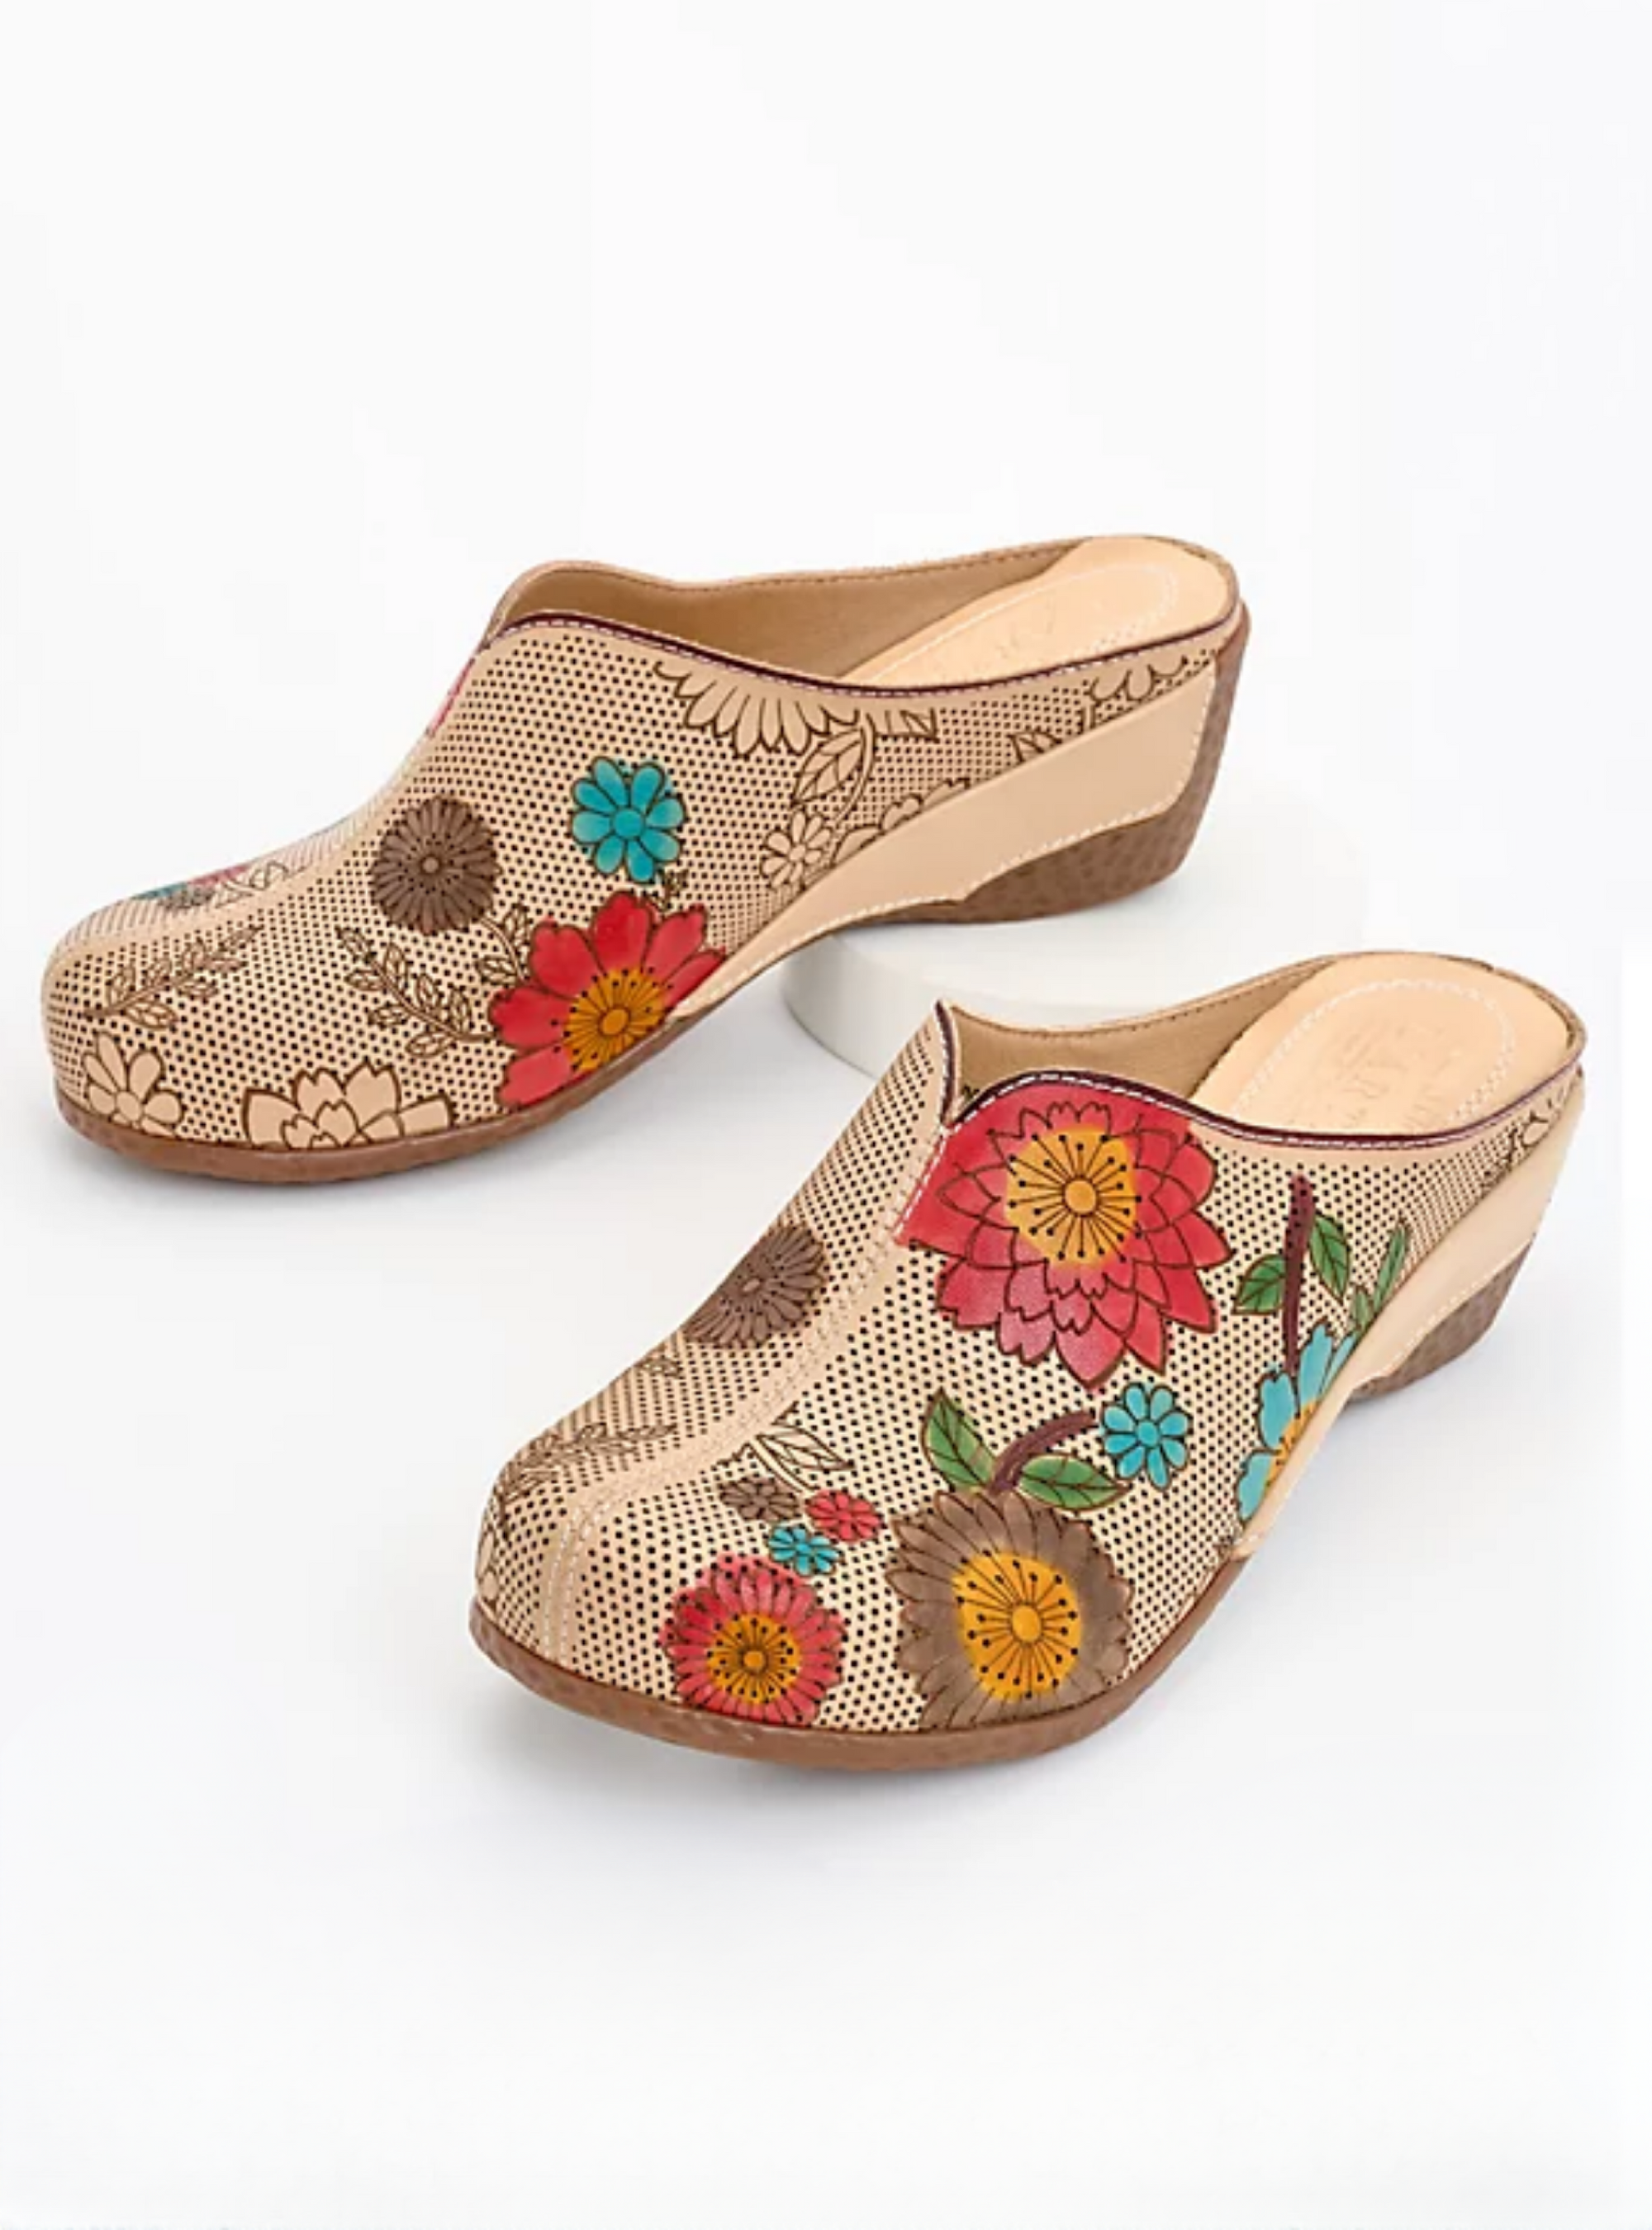 L'Artiste by Spring Step Chienti Clogs